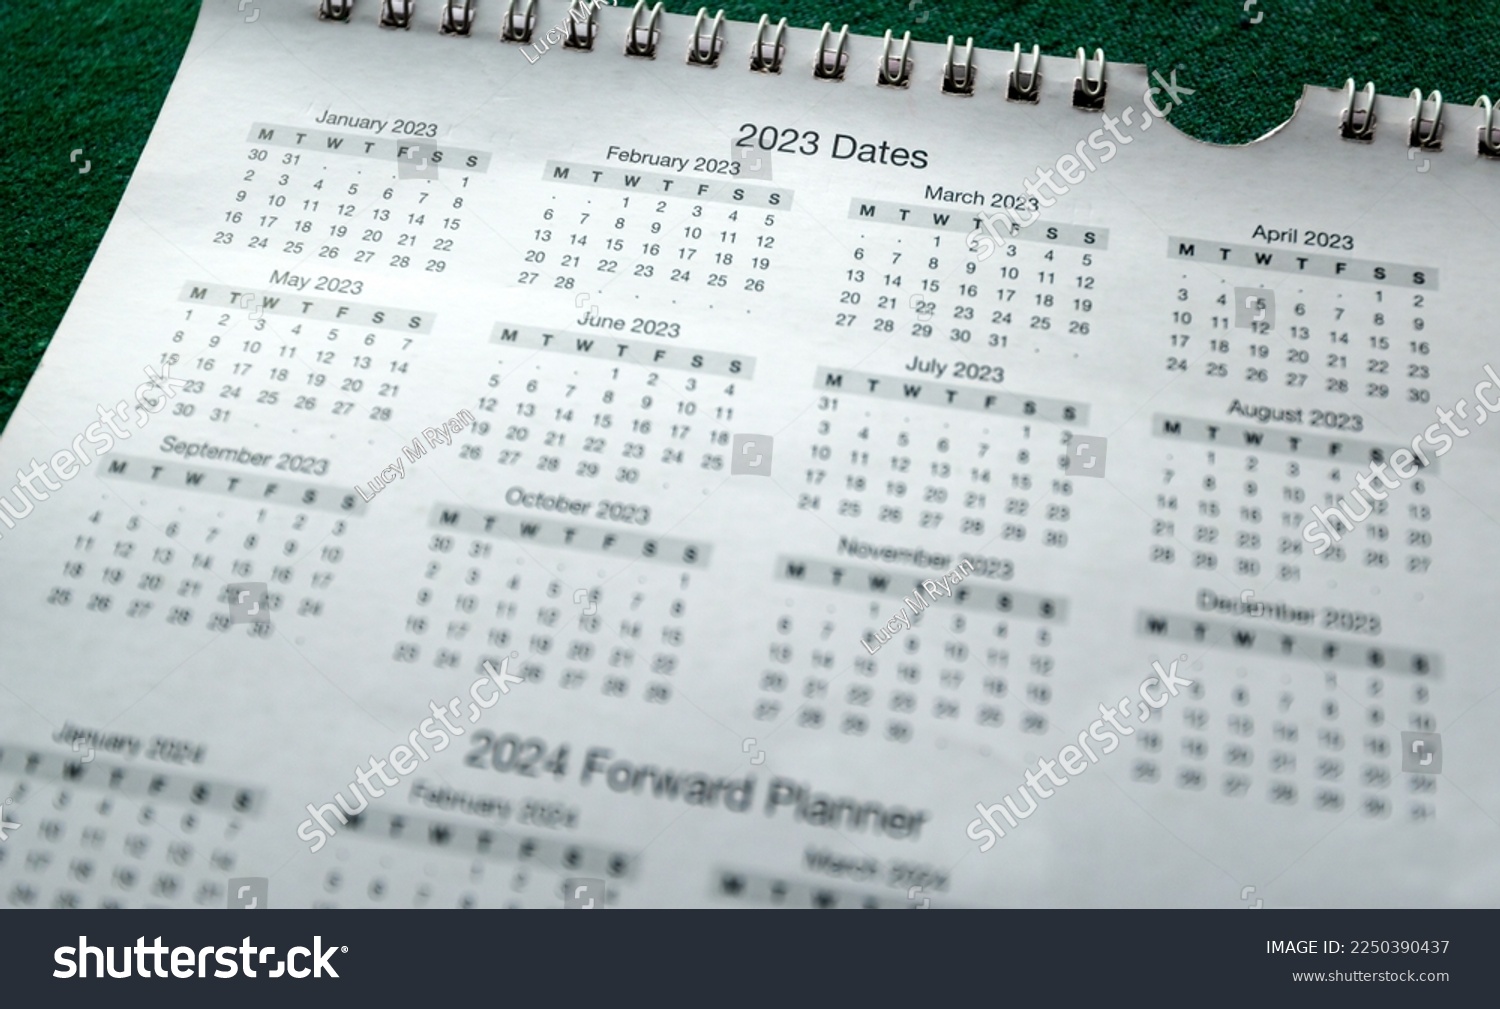 Calendar 2023, monthly planner with all days and months of the year for 2023 and 2024 forward planner. January, February, March, April, May, June, July, August, September, October, November, December  #2250390437